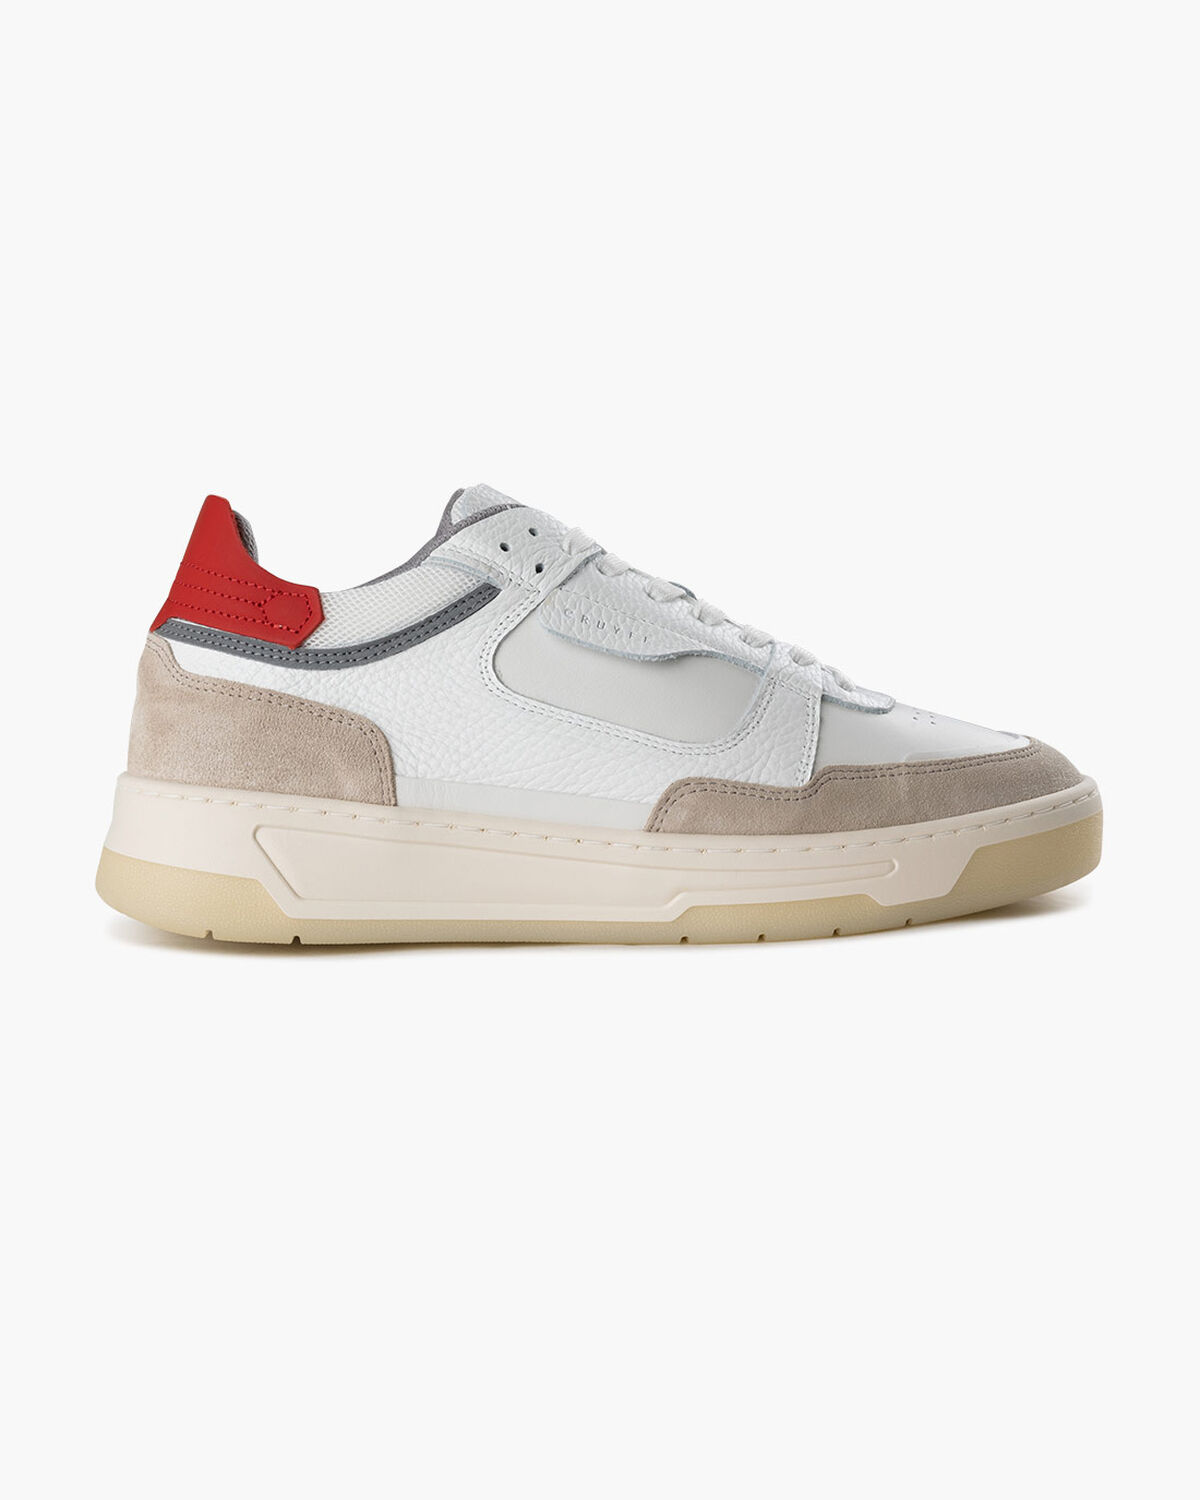 Nemes Mid - Soft Nappa/Suede, White/Red, hi-res